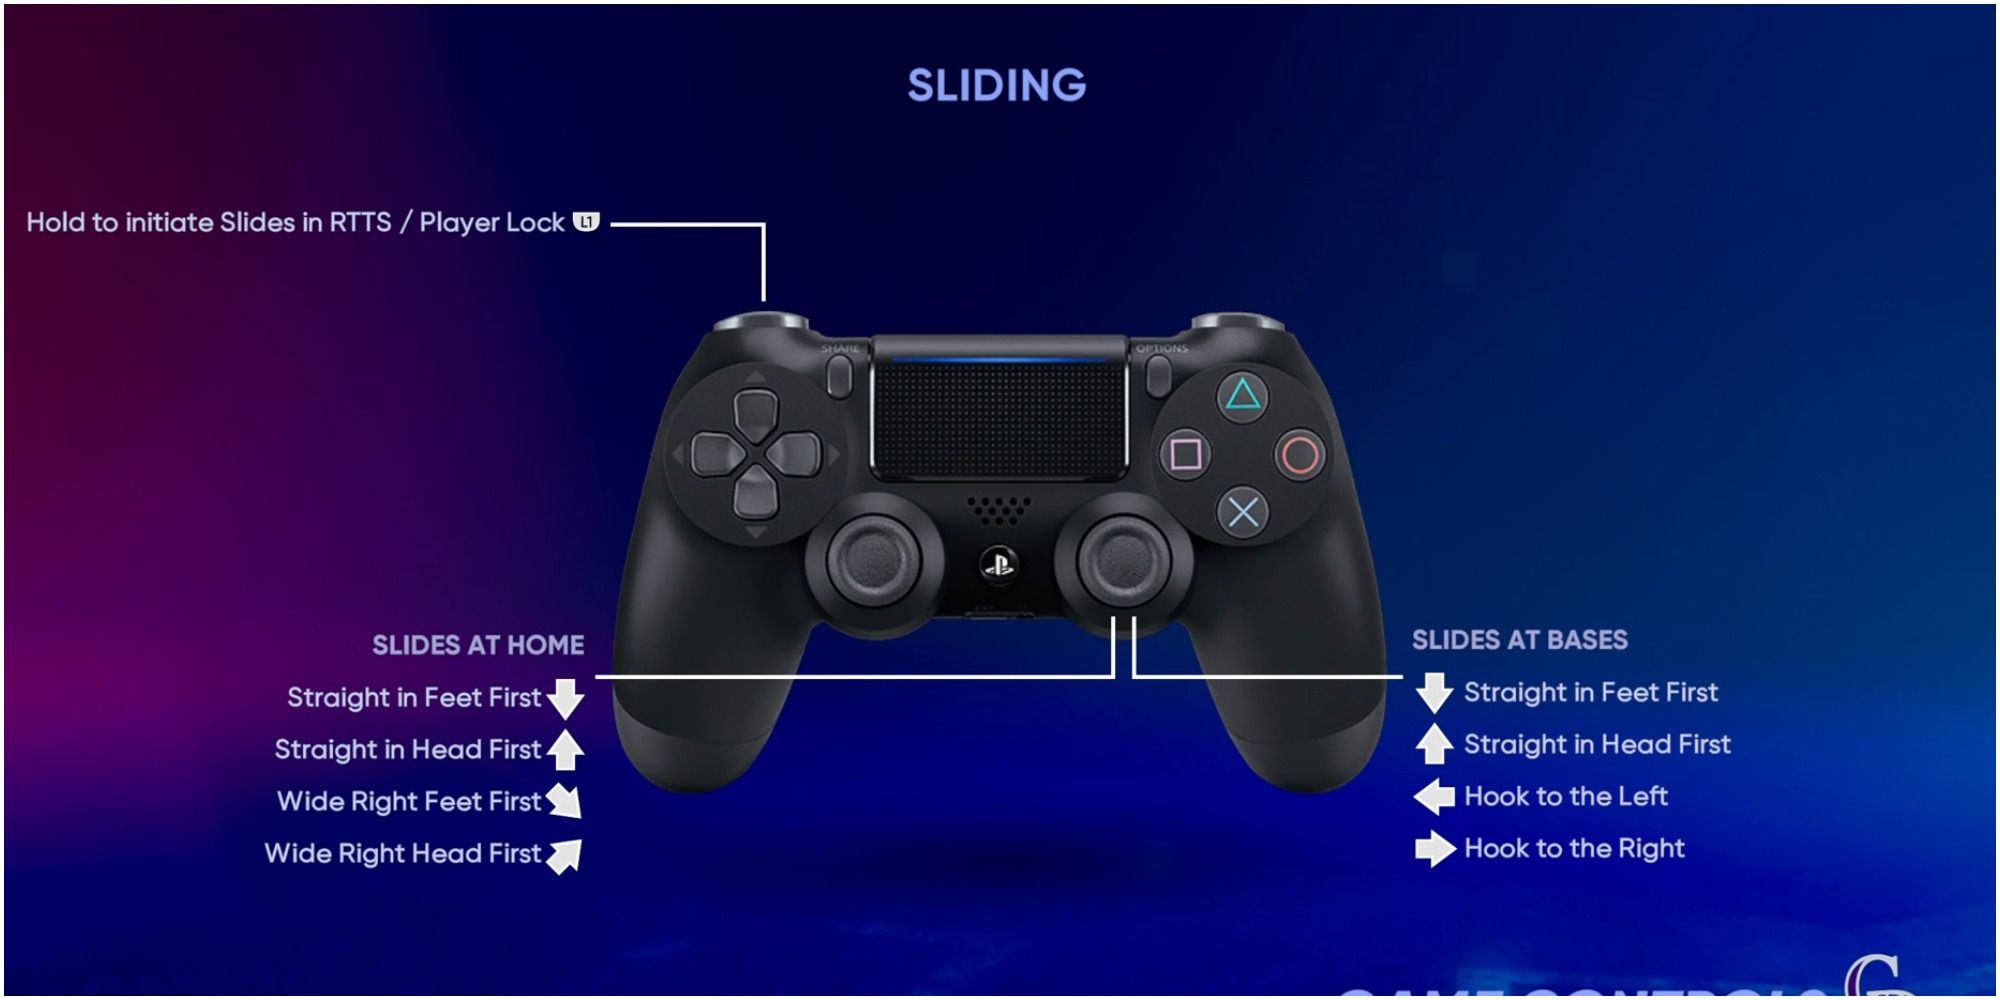 MLB The Show 22 Default Buttons For Sliding